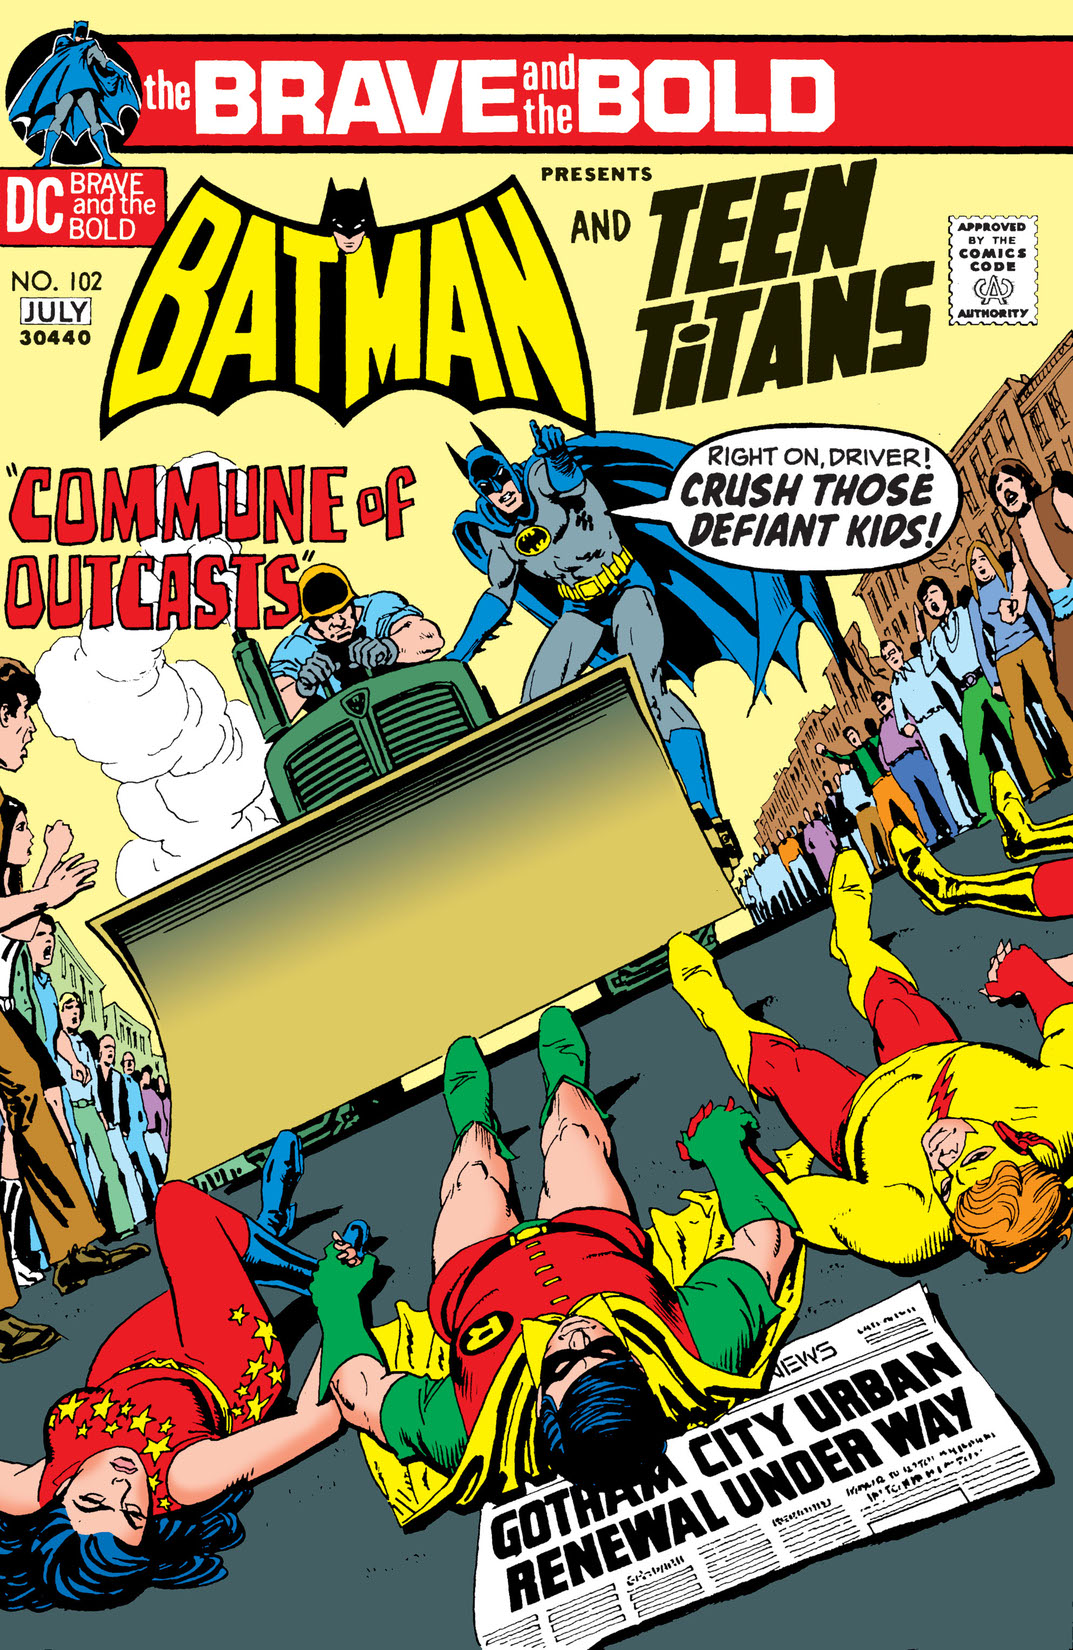 The Brave and the Bold (1955-) #102 preview images